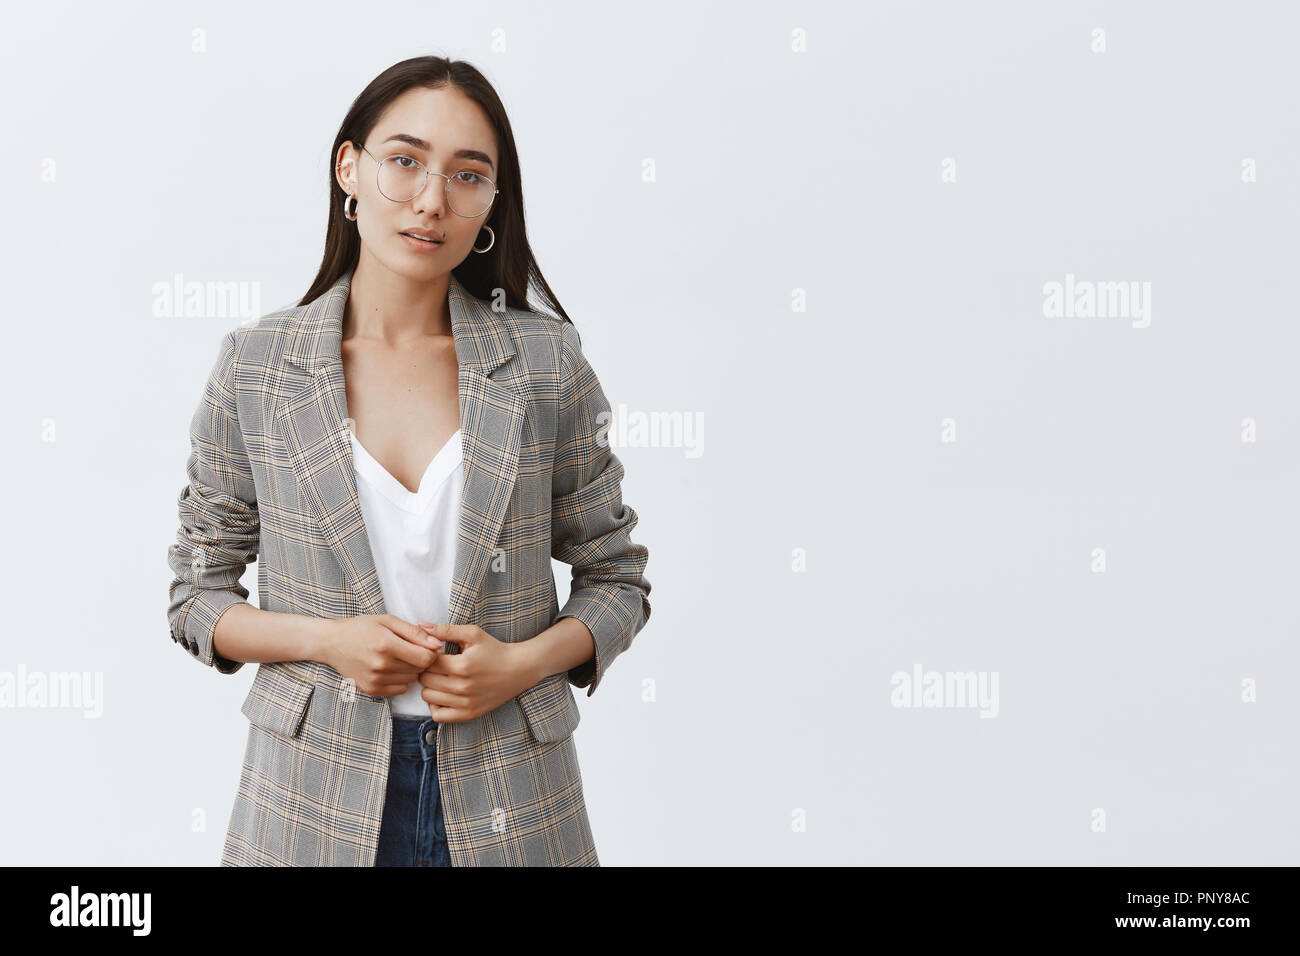 Girl hesitating, wanting tell something important. Portrait of serious unsure female entrepreneur in stylish jacket and glasses, touching fingers and gazing at camera with doubt over grey wall Stock Photo